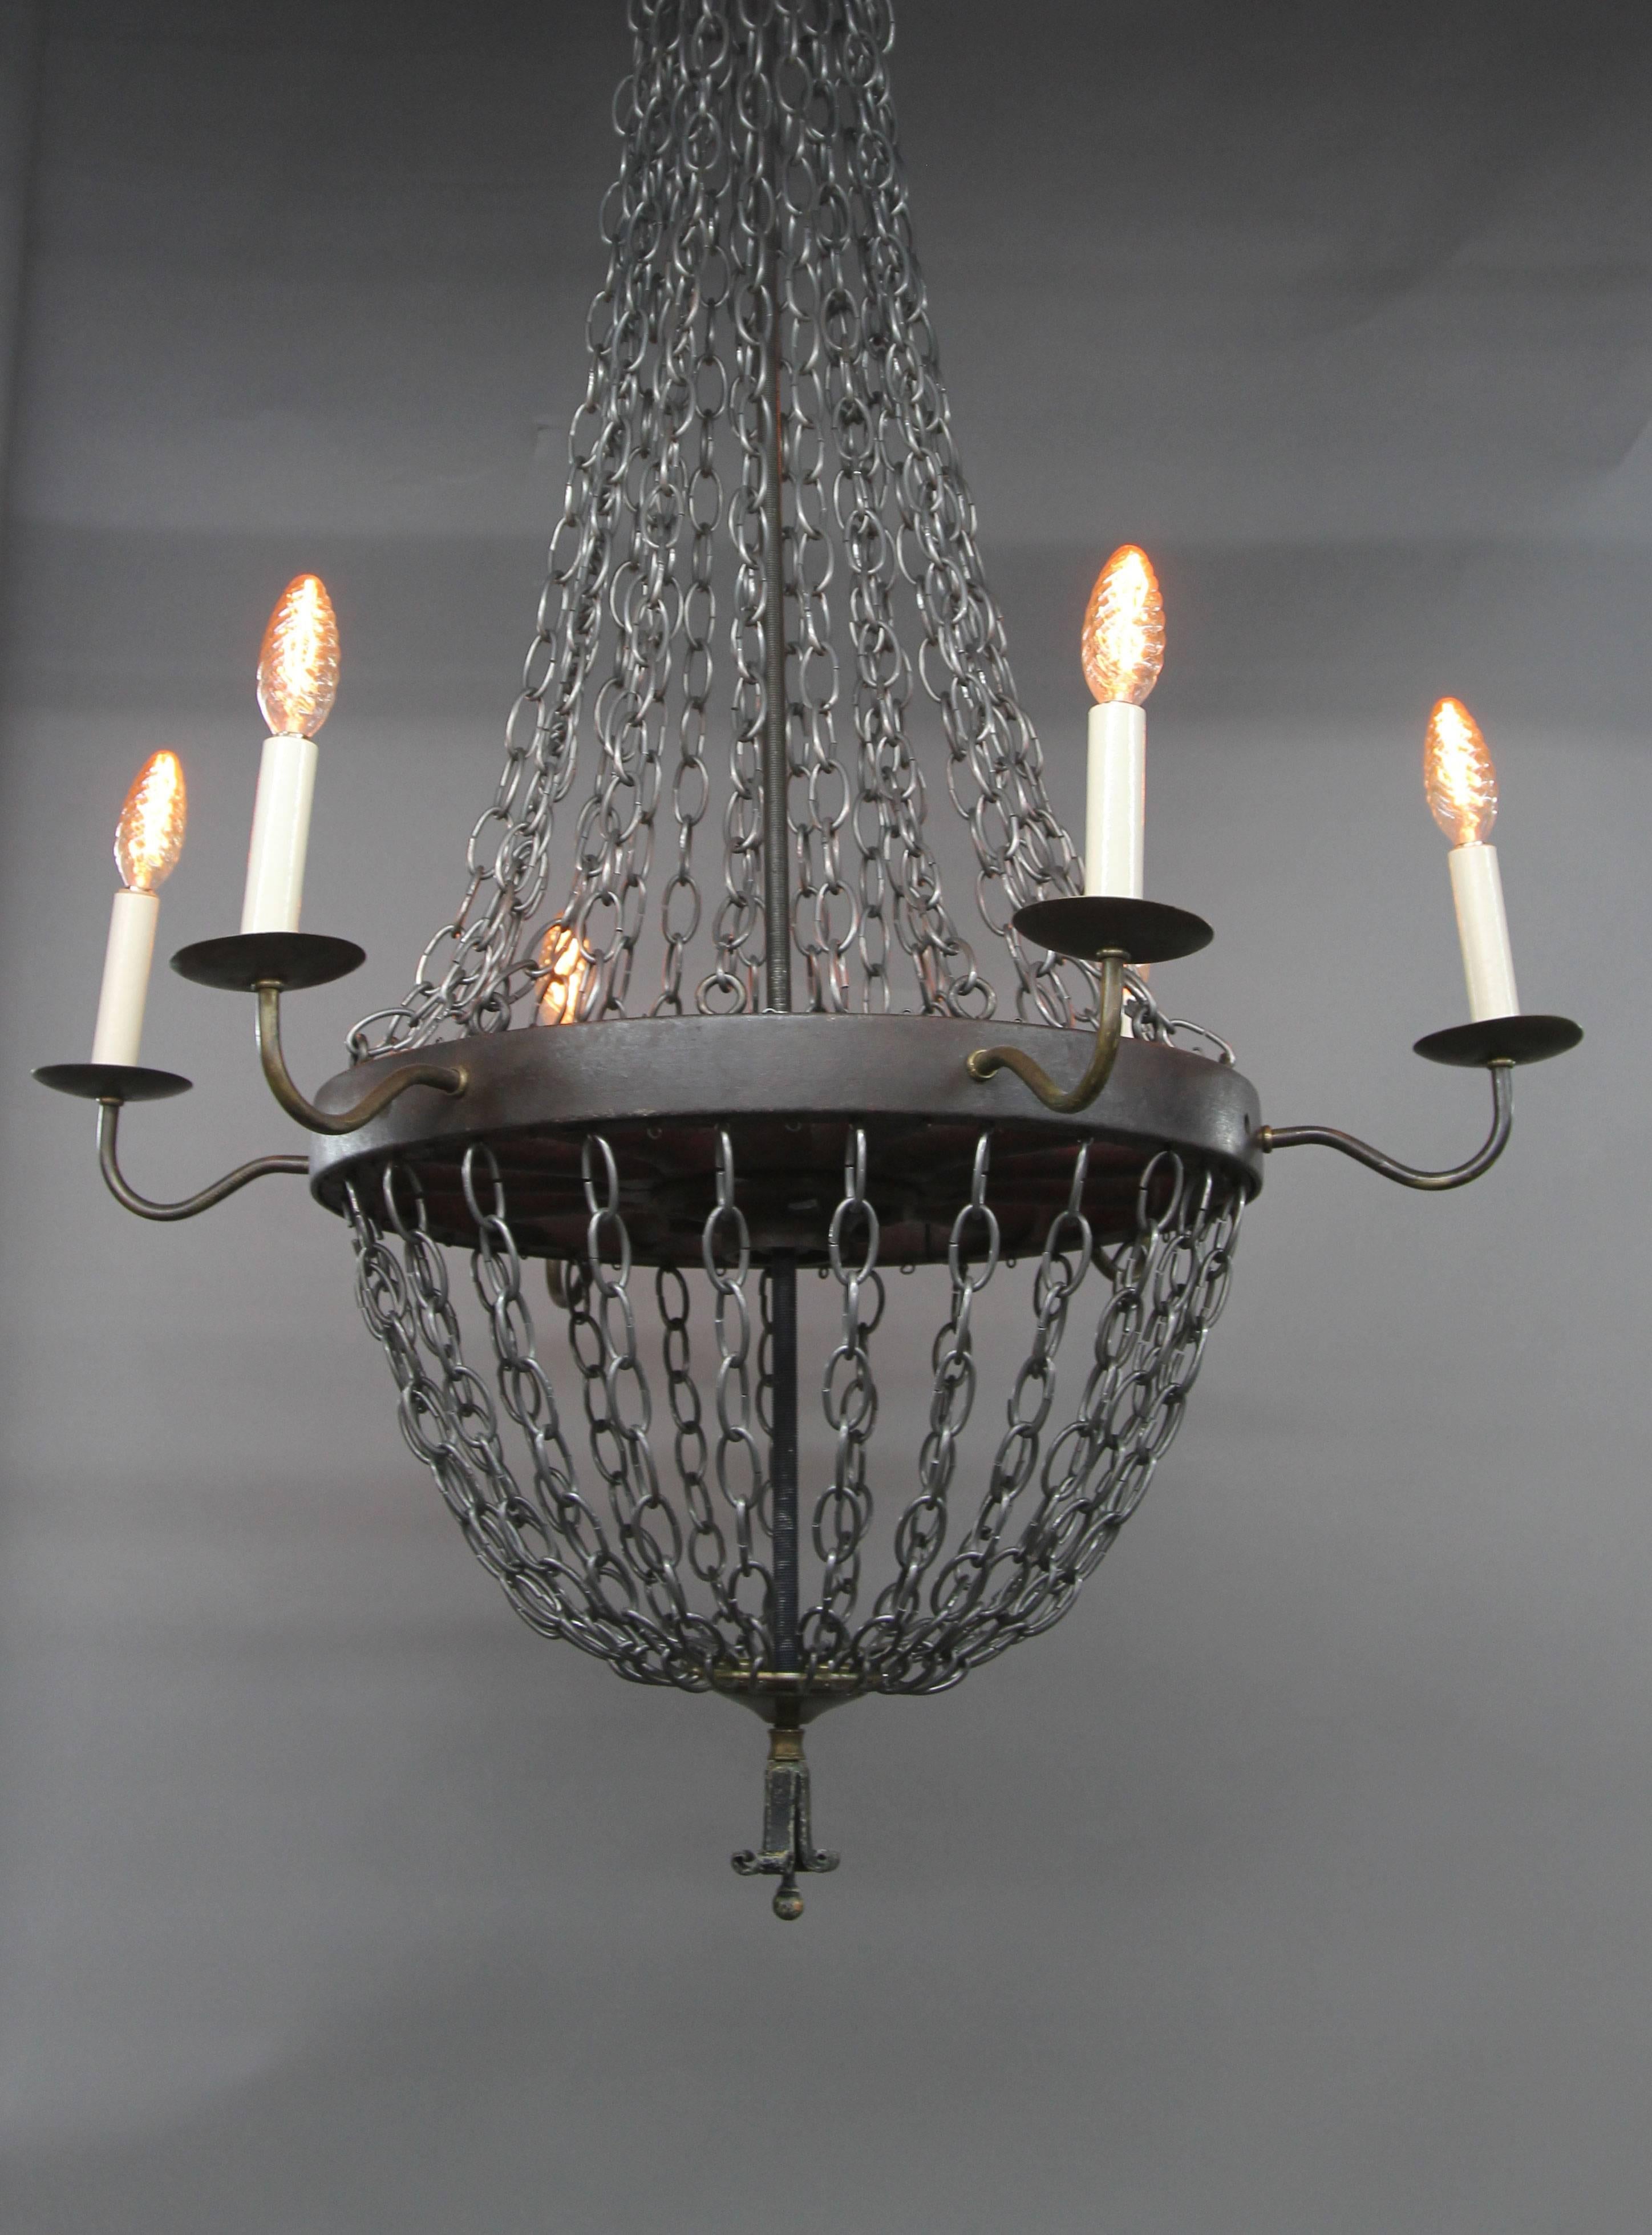 Unique and impressive, this superbly handcrafted six-arm chandelier features steel chains linking to a distressed Industrial wheel base reminiscent of medieval times. Six brass arms fitted with brass holders and amber candle flame bulbs. Brass